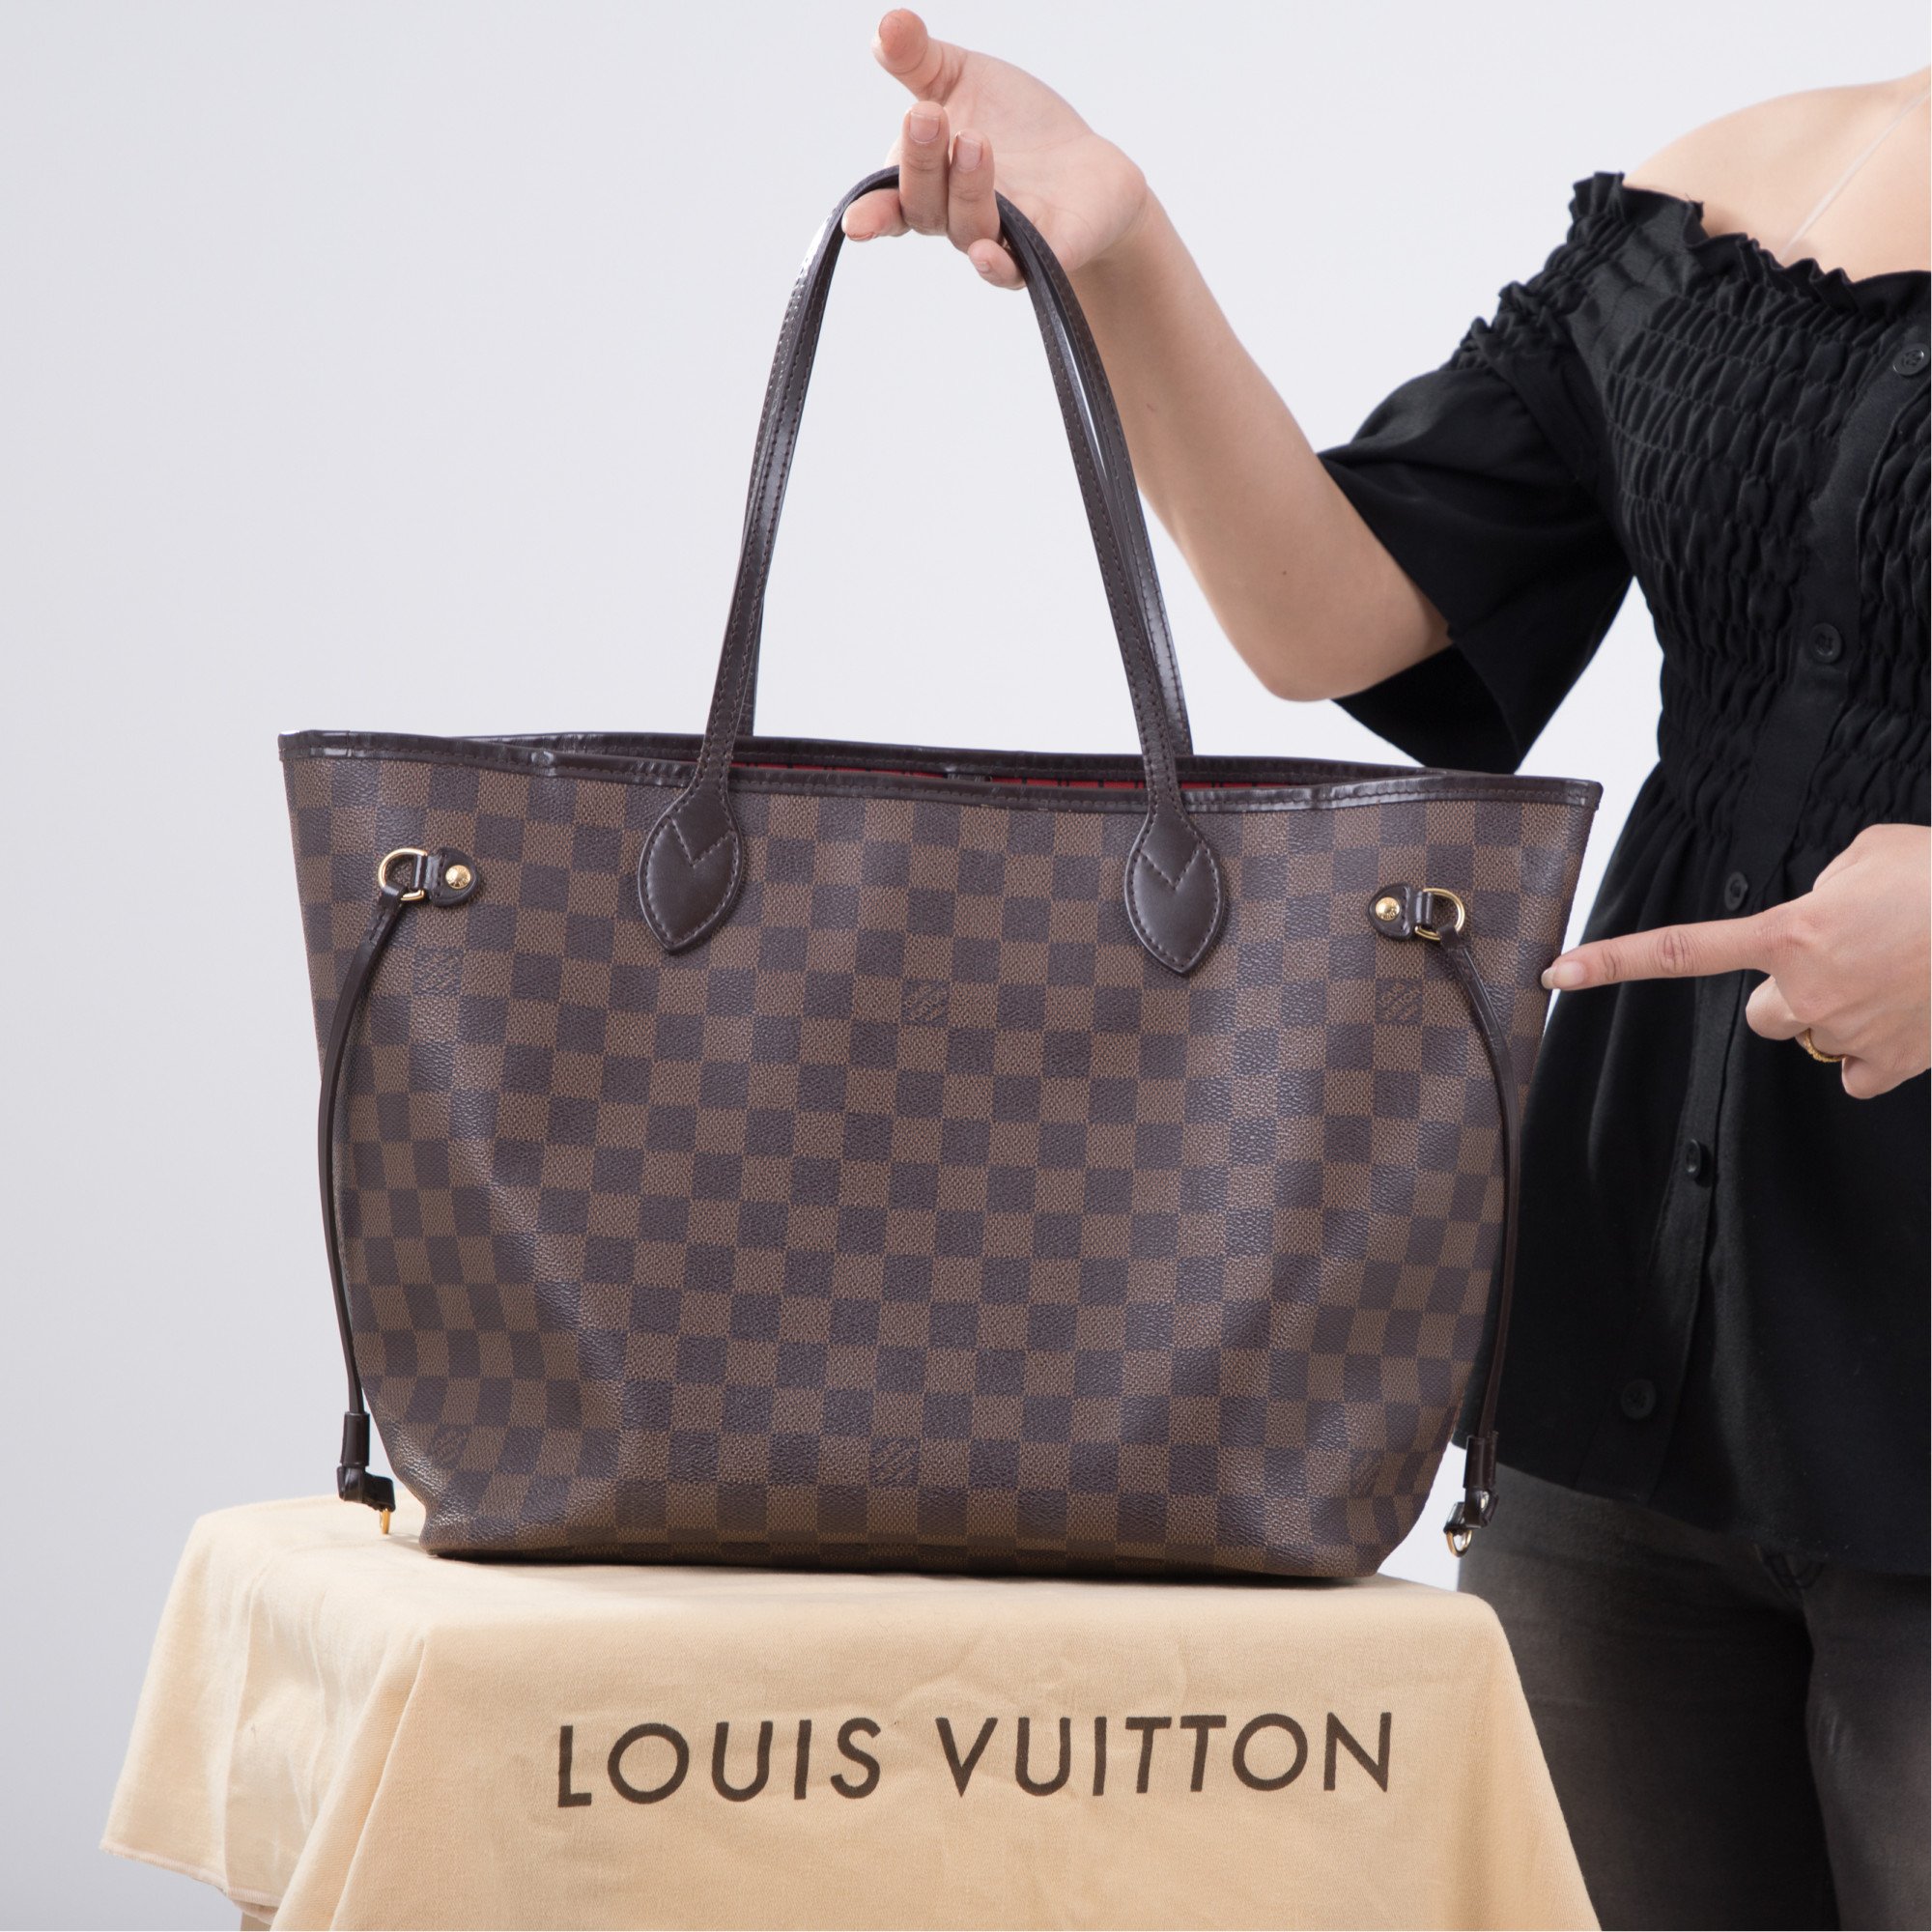 5 luxury bags with the best investment value over time: start your